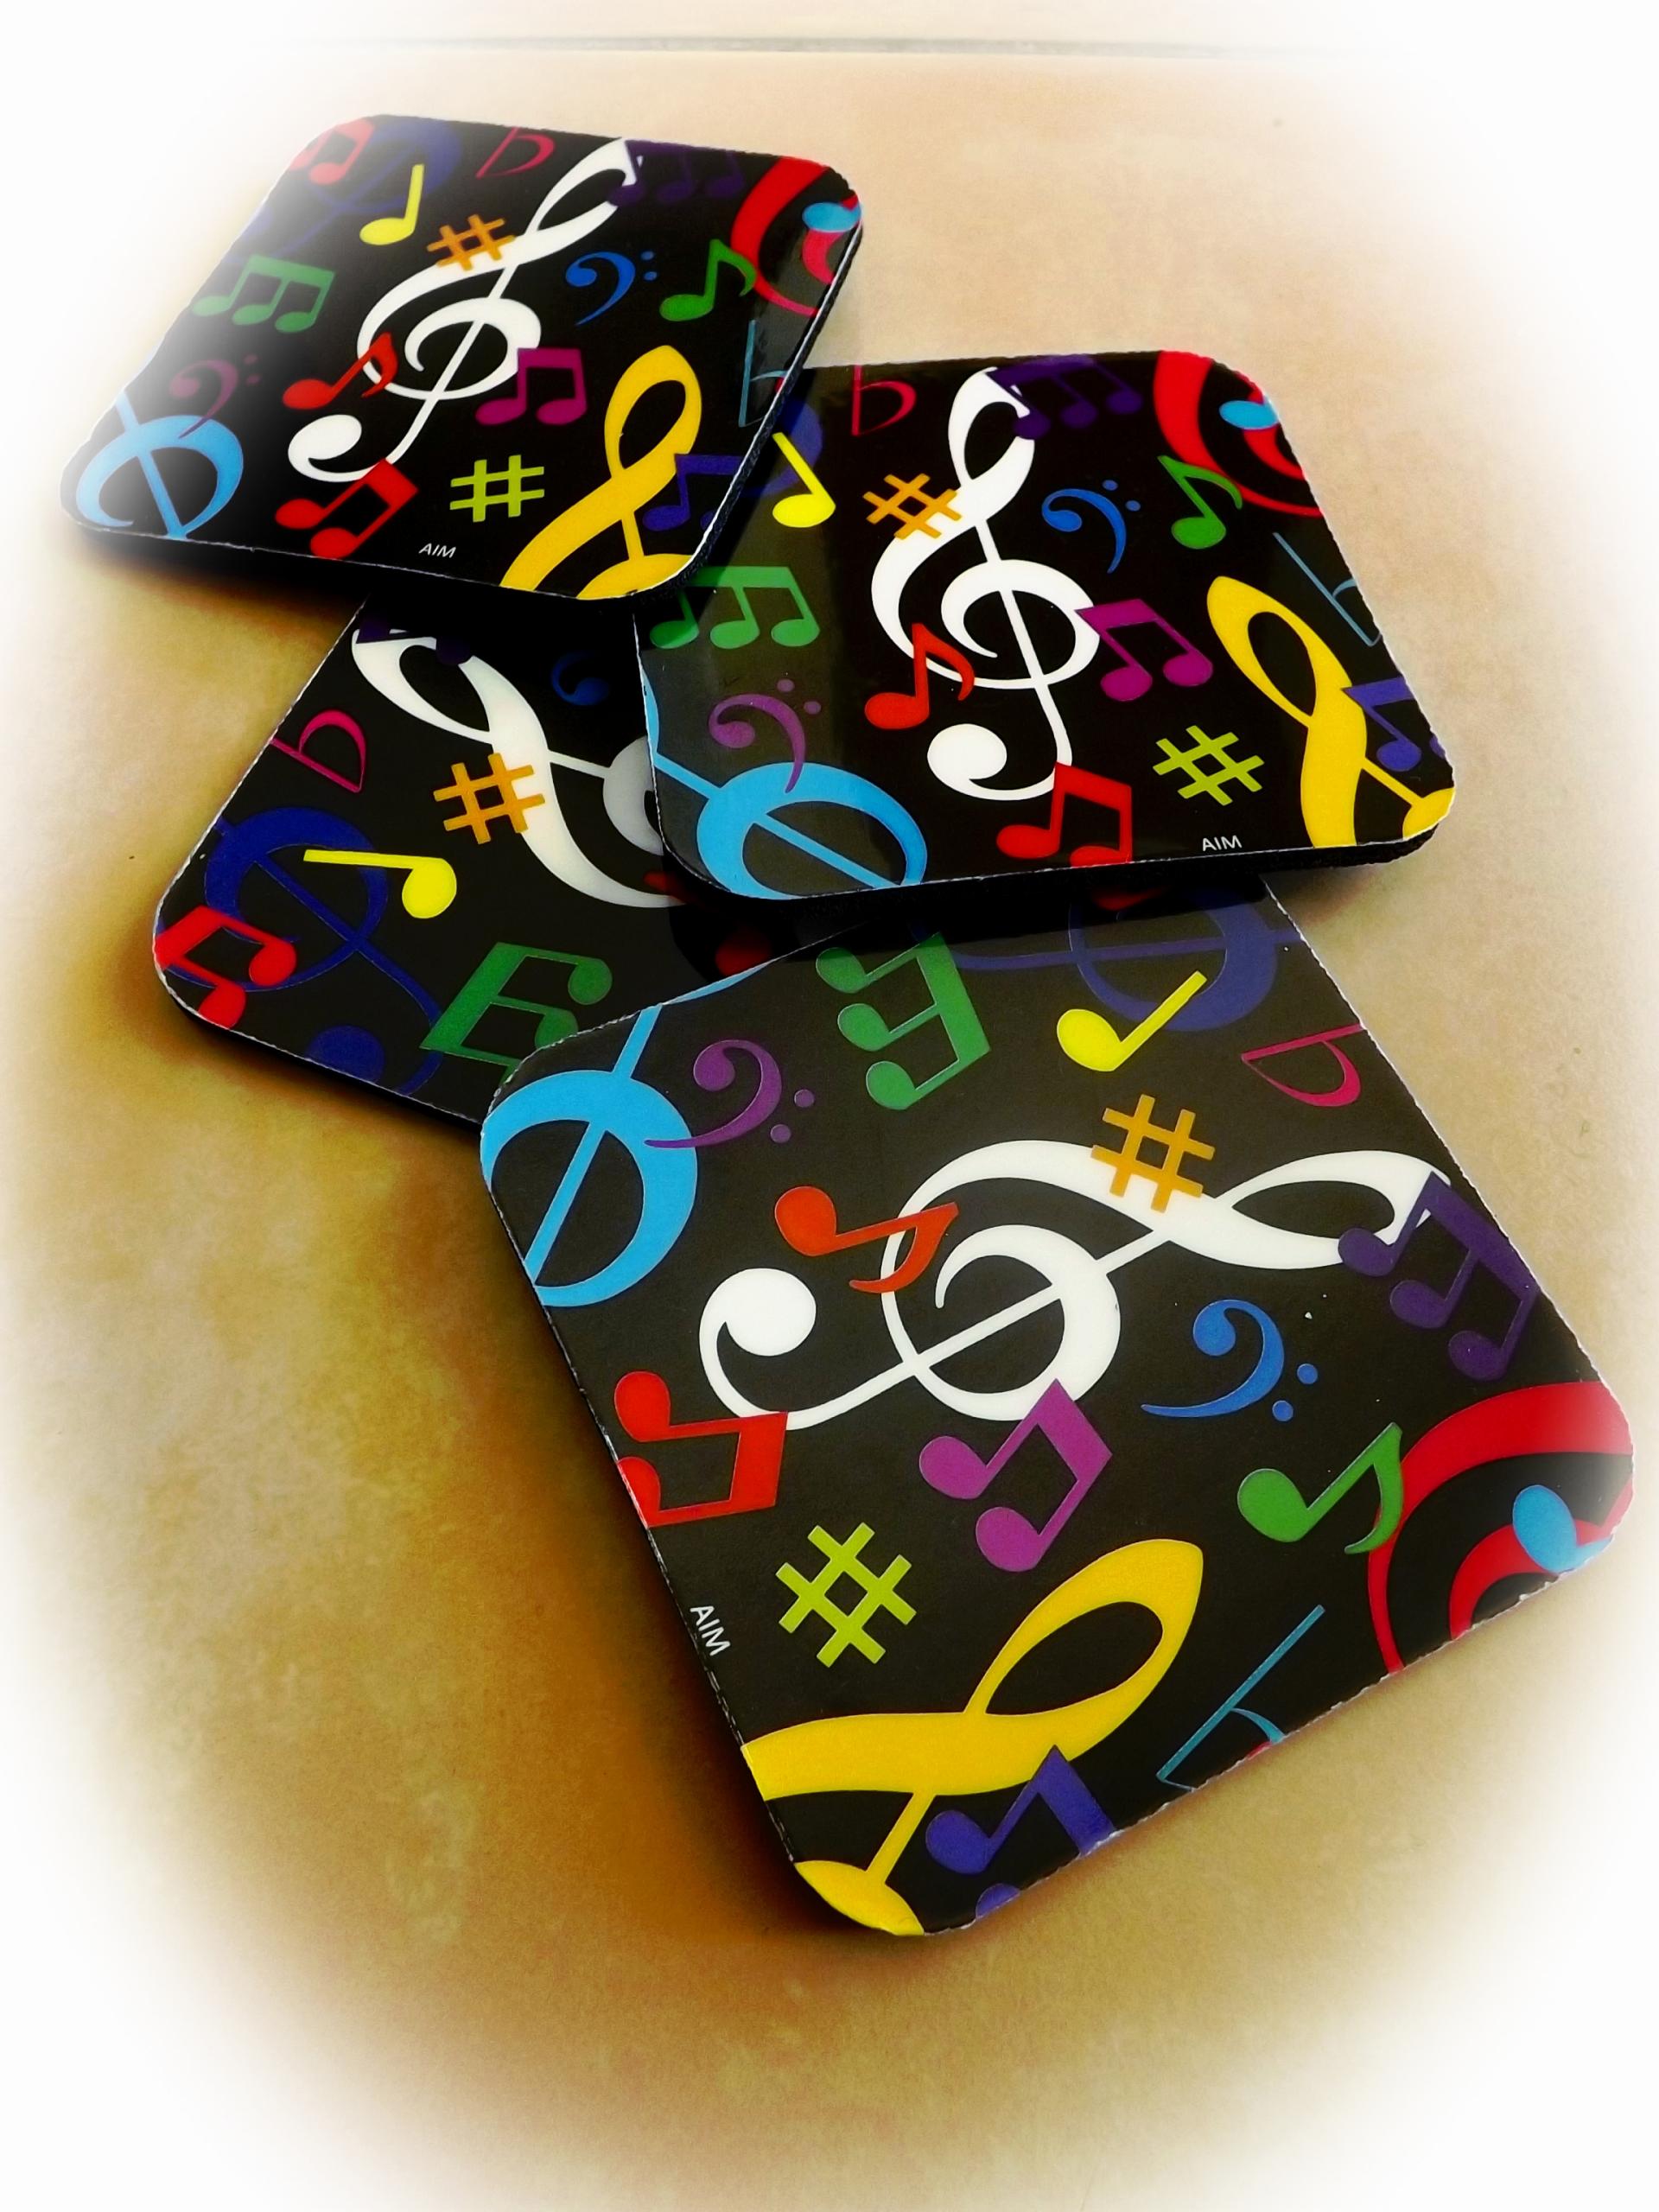 Music Themed Coasters - Colourful Set of 4